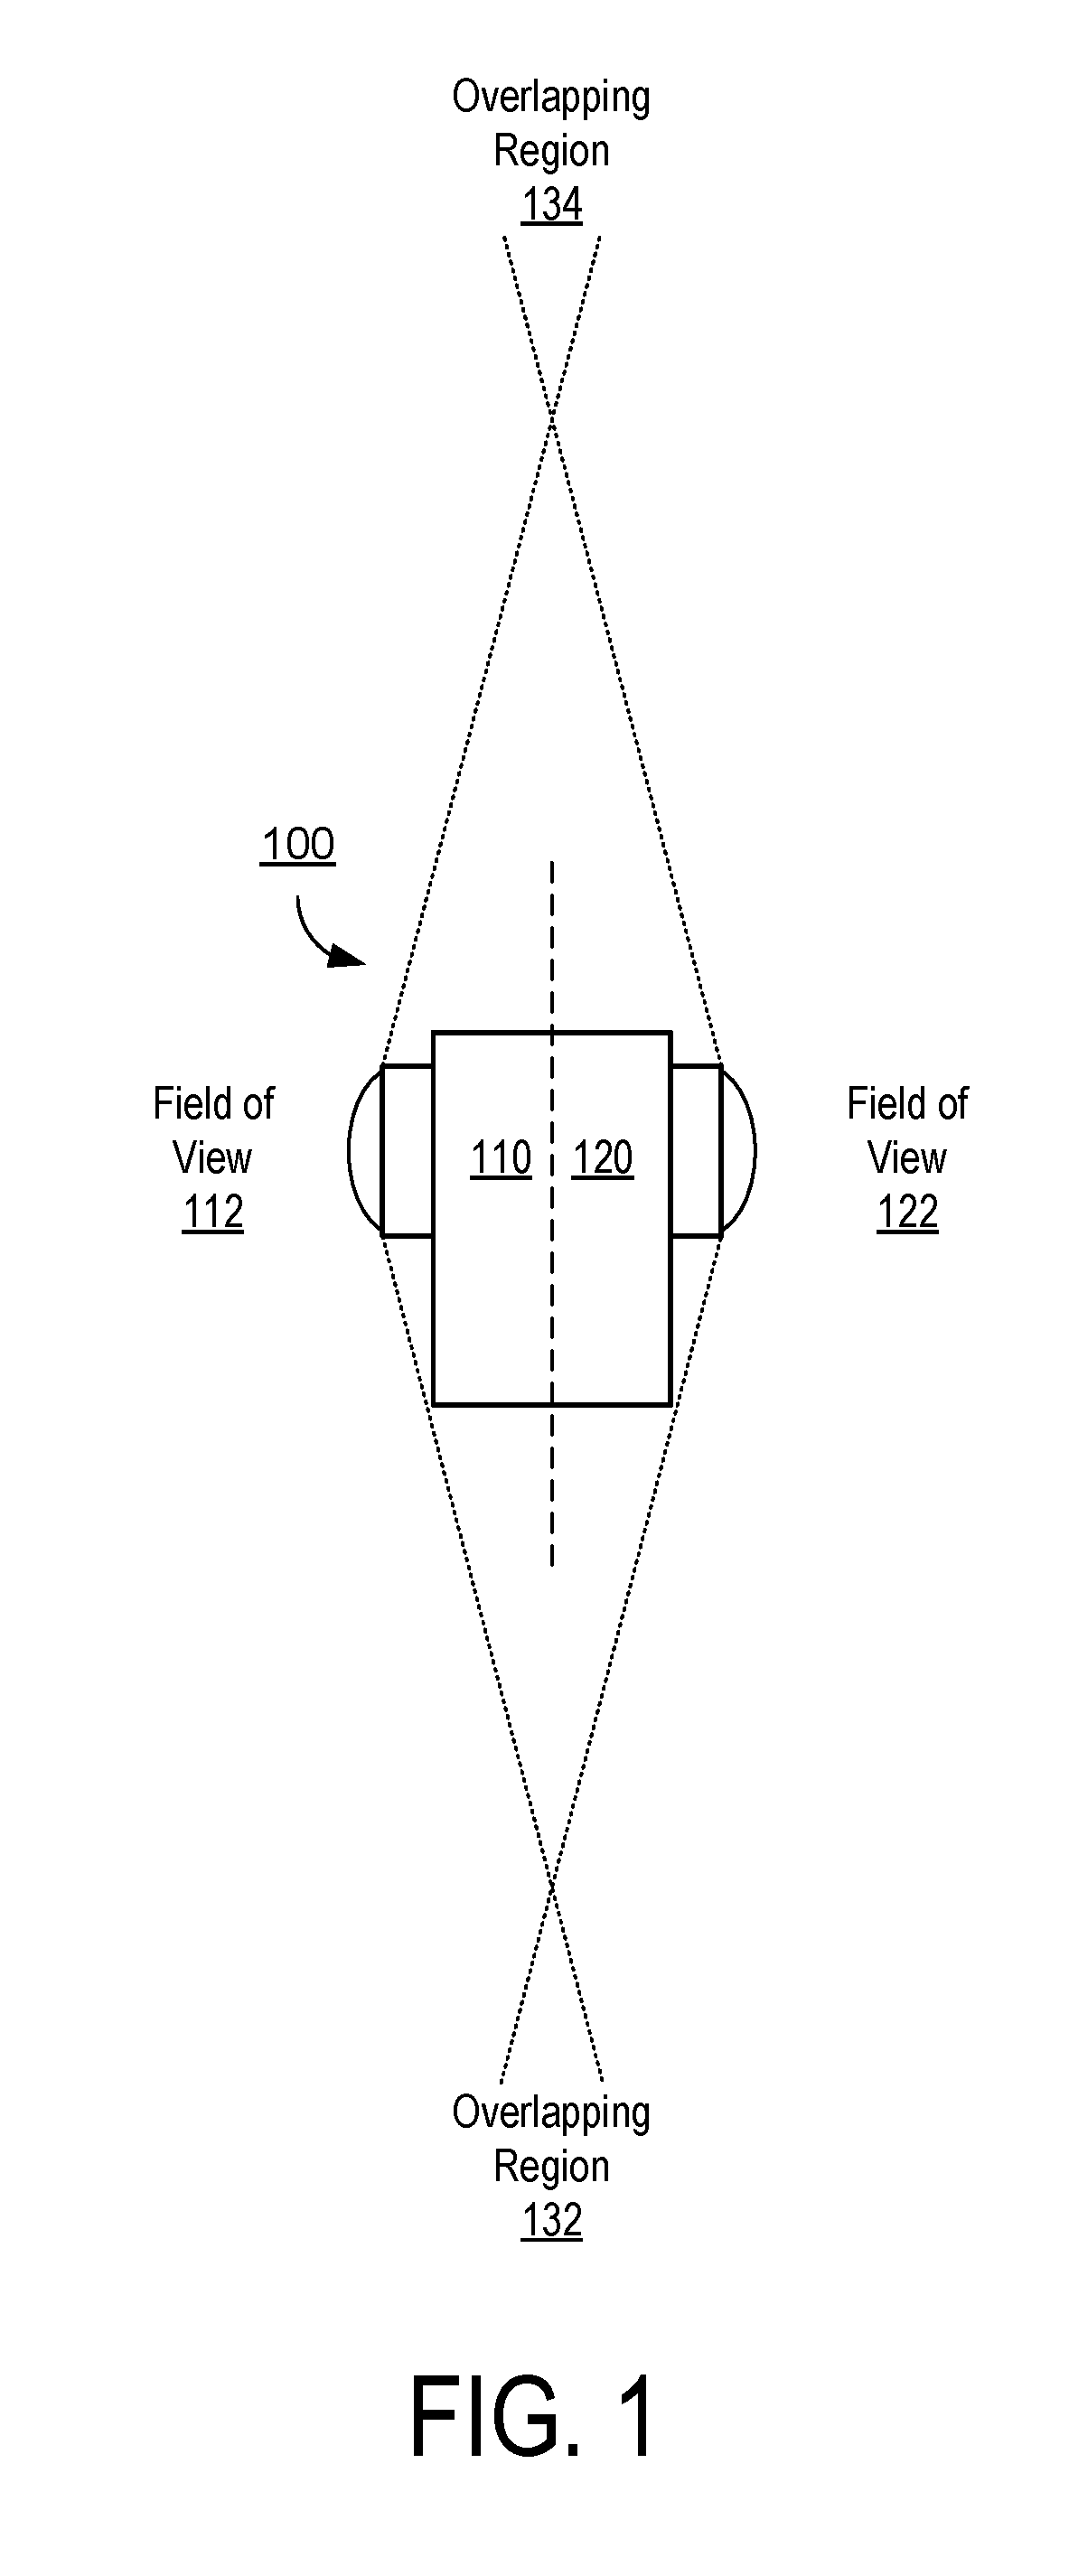 Equatorial Stitching of Hemispherical Images in a Spherical Image Capture System